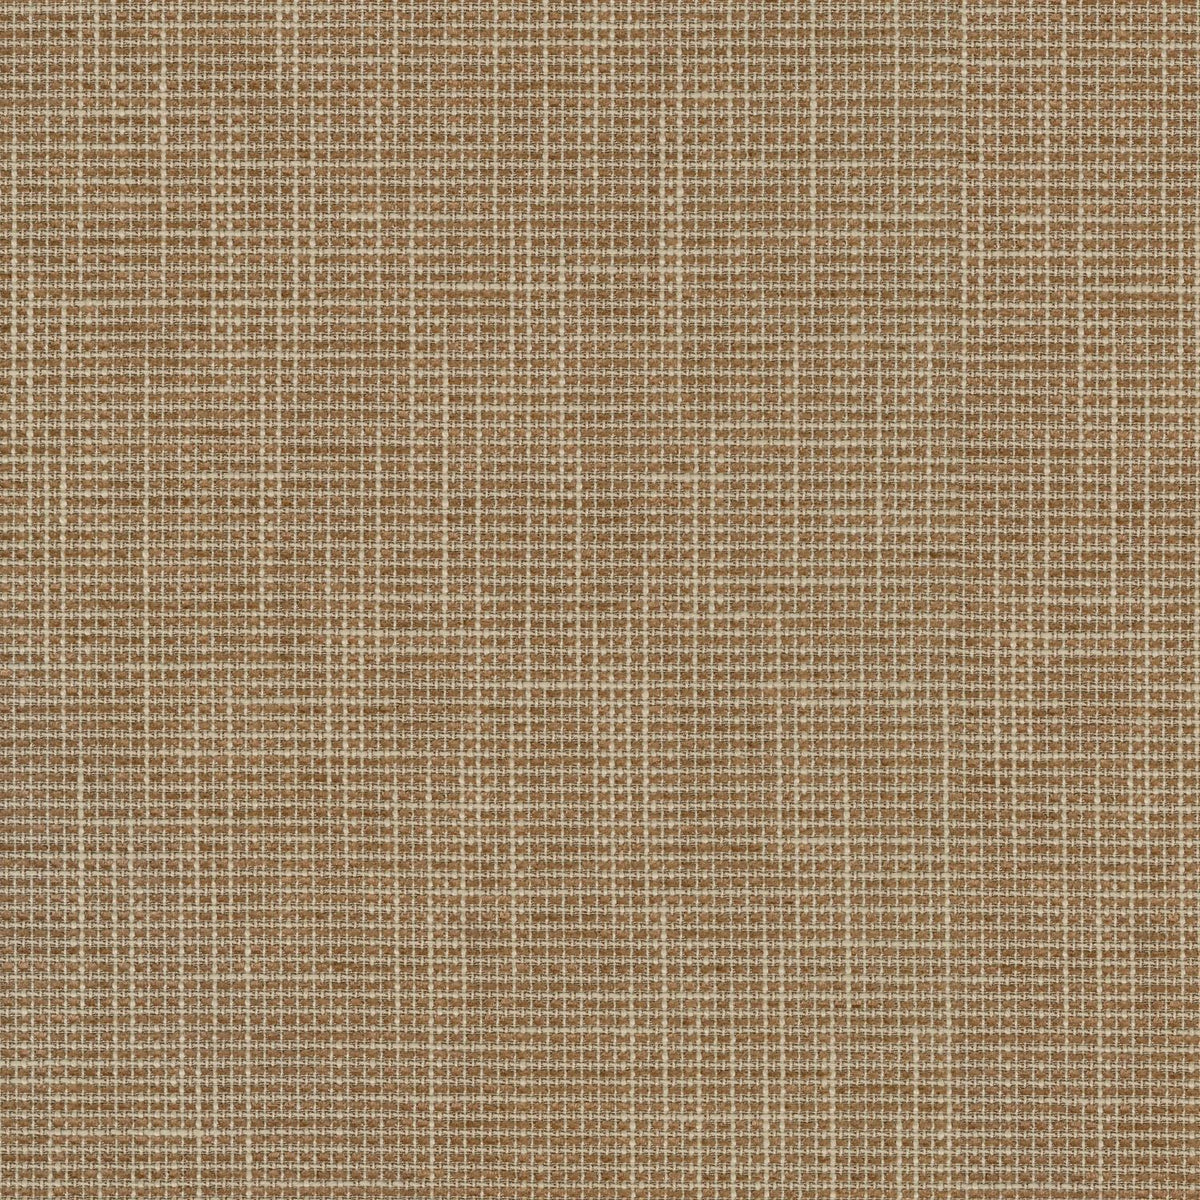 P/K Lifestyles Layla - Gingerbread 410244 Fabric Swatch